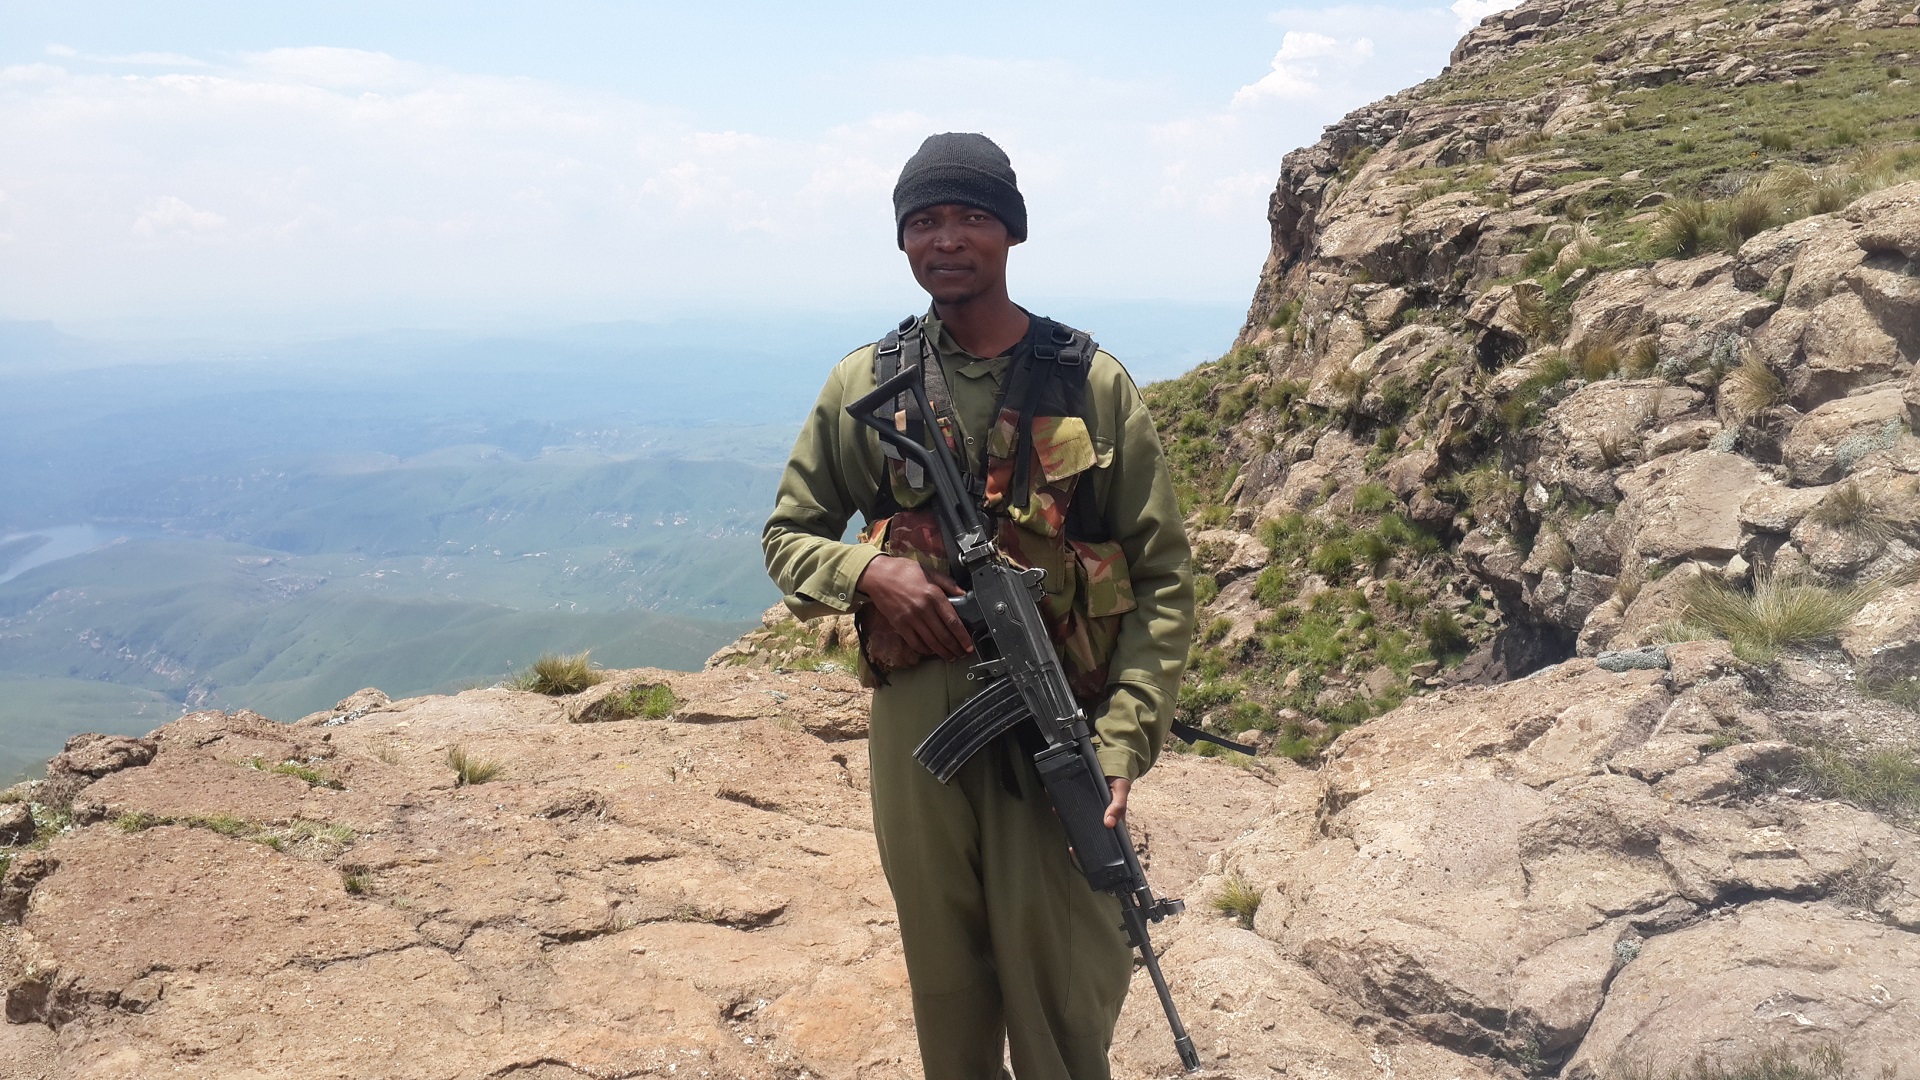 A guard from Lesotho on duty at the plateau. At least the safety catch seems to be on.